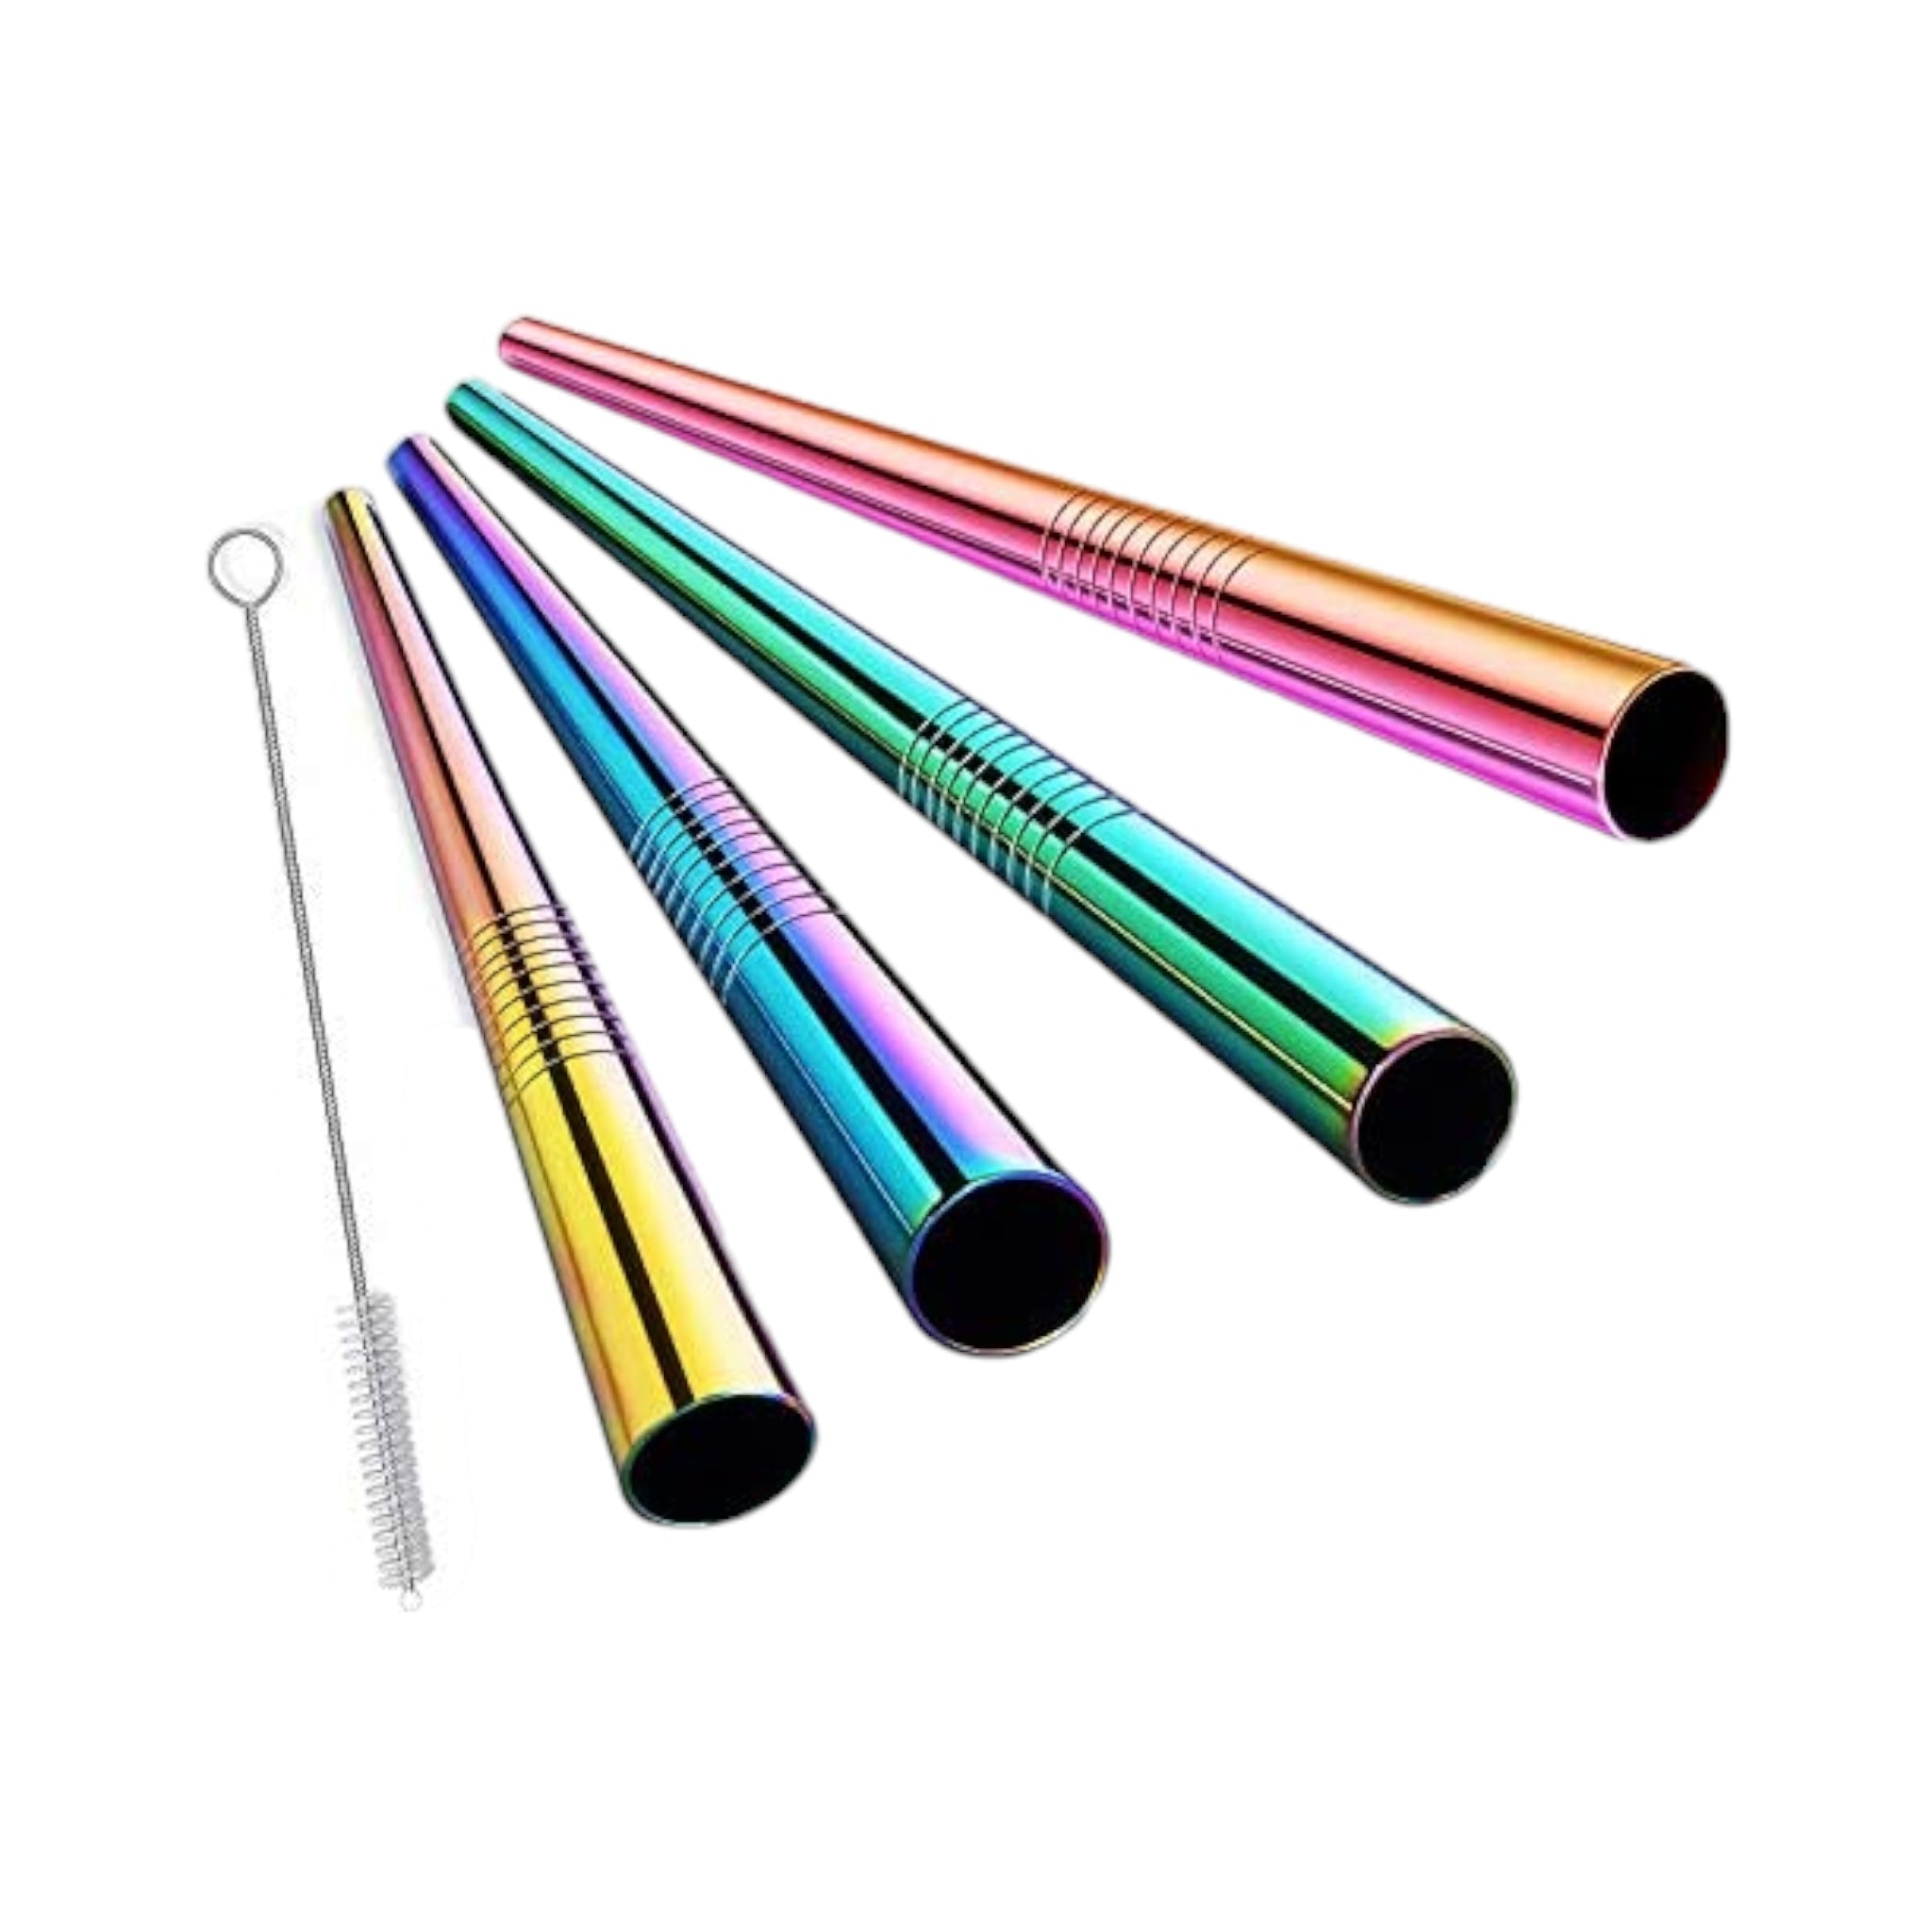 Stainless Steel Straws 7mmx22.5cm with Brush 11pack